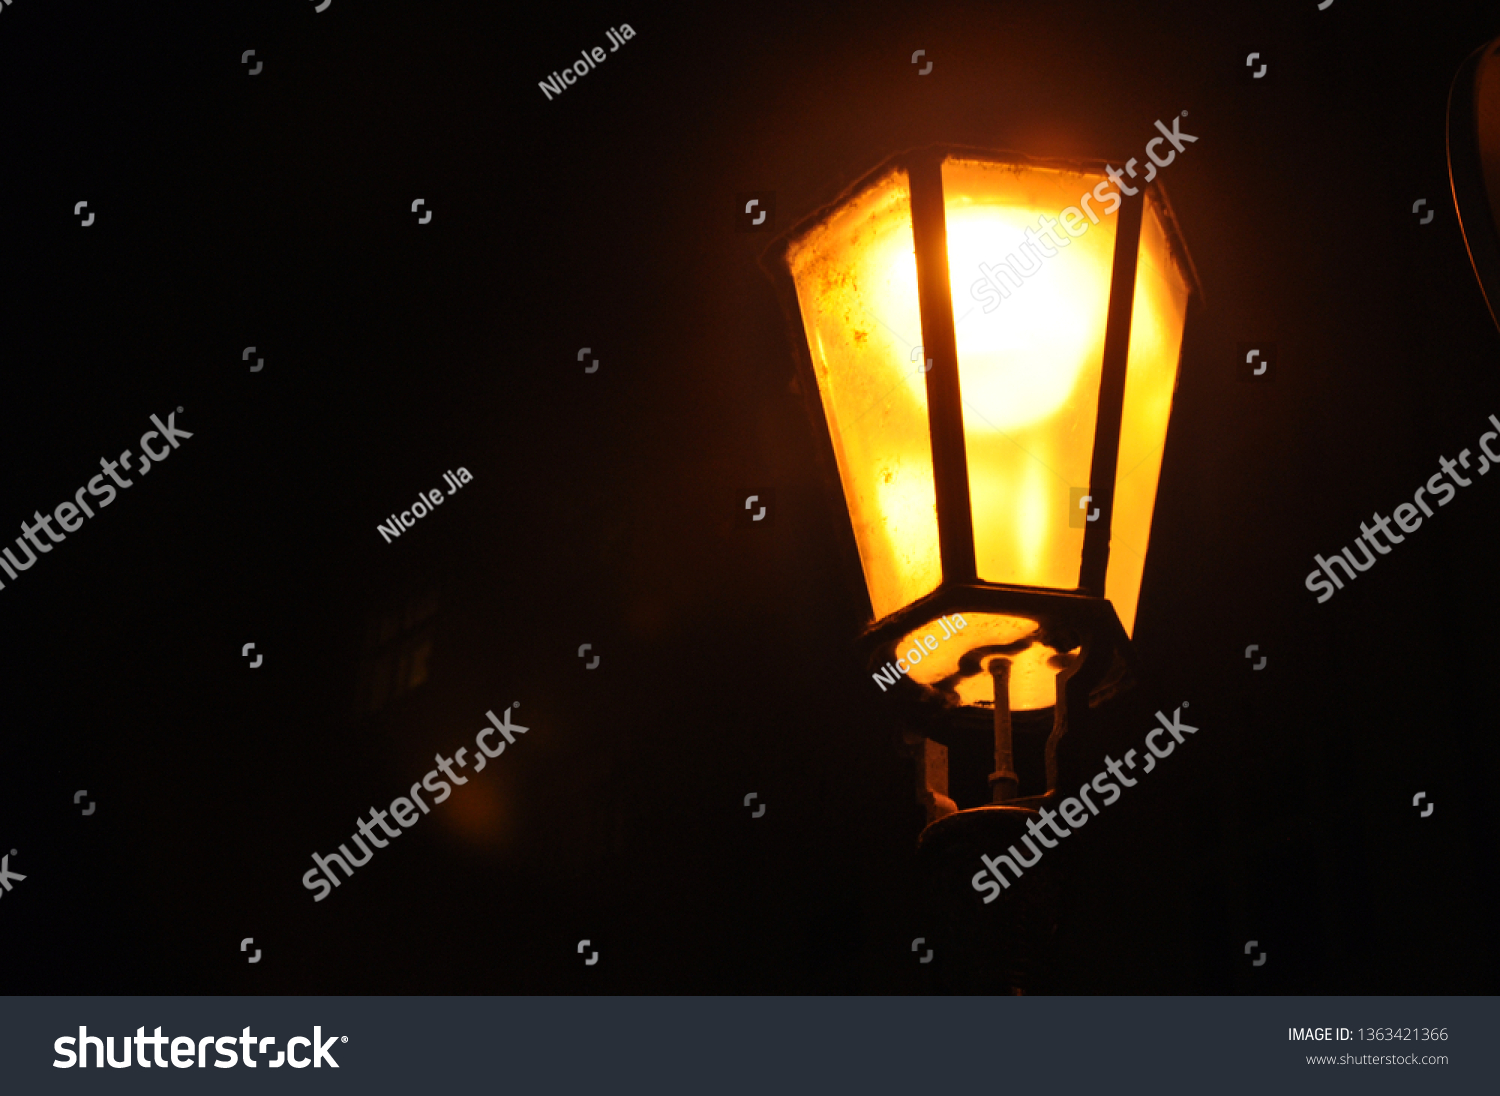 Amber glow from street lamp. Extremely aesthetic. Mysterious, foreshadowing and dangerous feeling but also warm, giving a sense of home and safety. Extreme contrast #1363421366